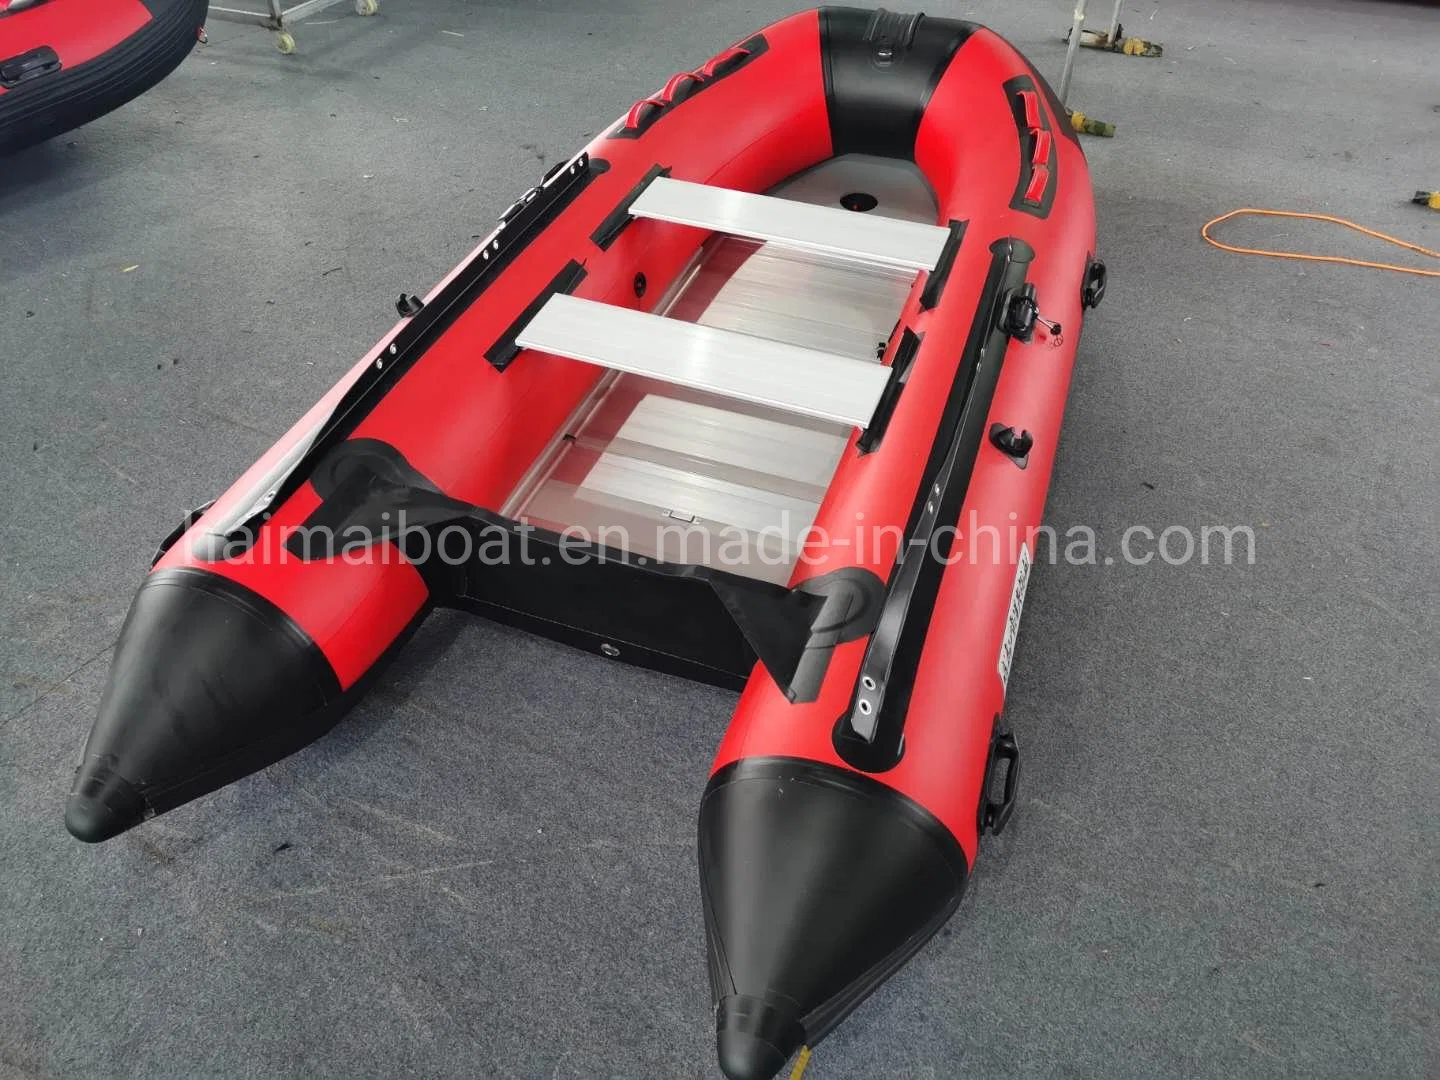 Classical Style 10.8FT 3.3m PVC Inflatable Boat Marine Rescue Boat Sea Fishing Boat with Aluminum Floor Military Patrol Boat Panga Boat Fishing Fishery Vessel